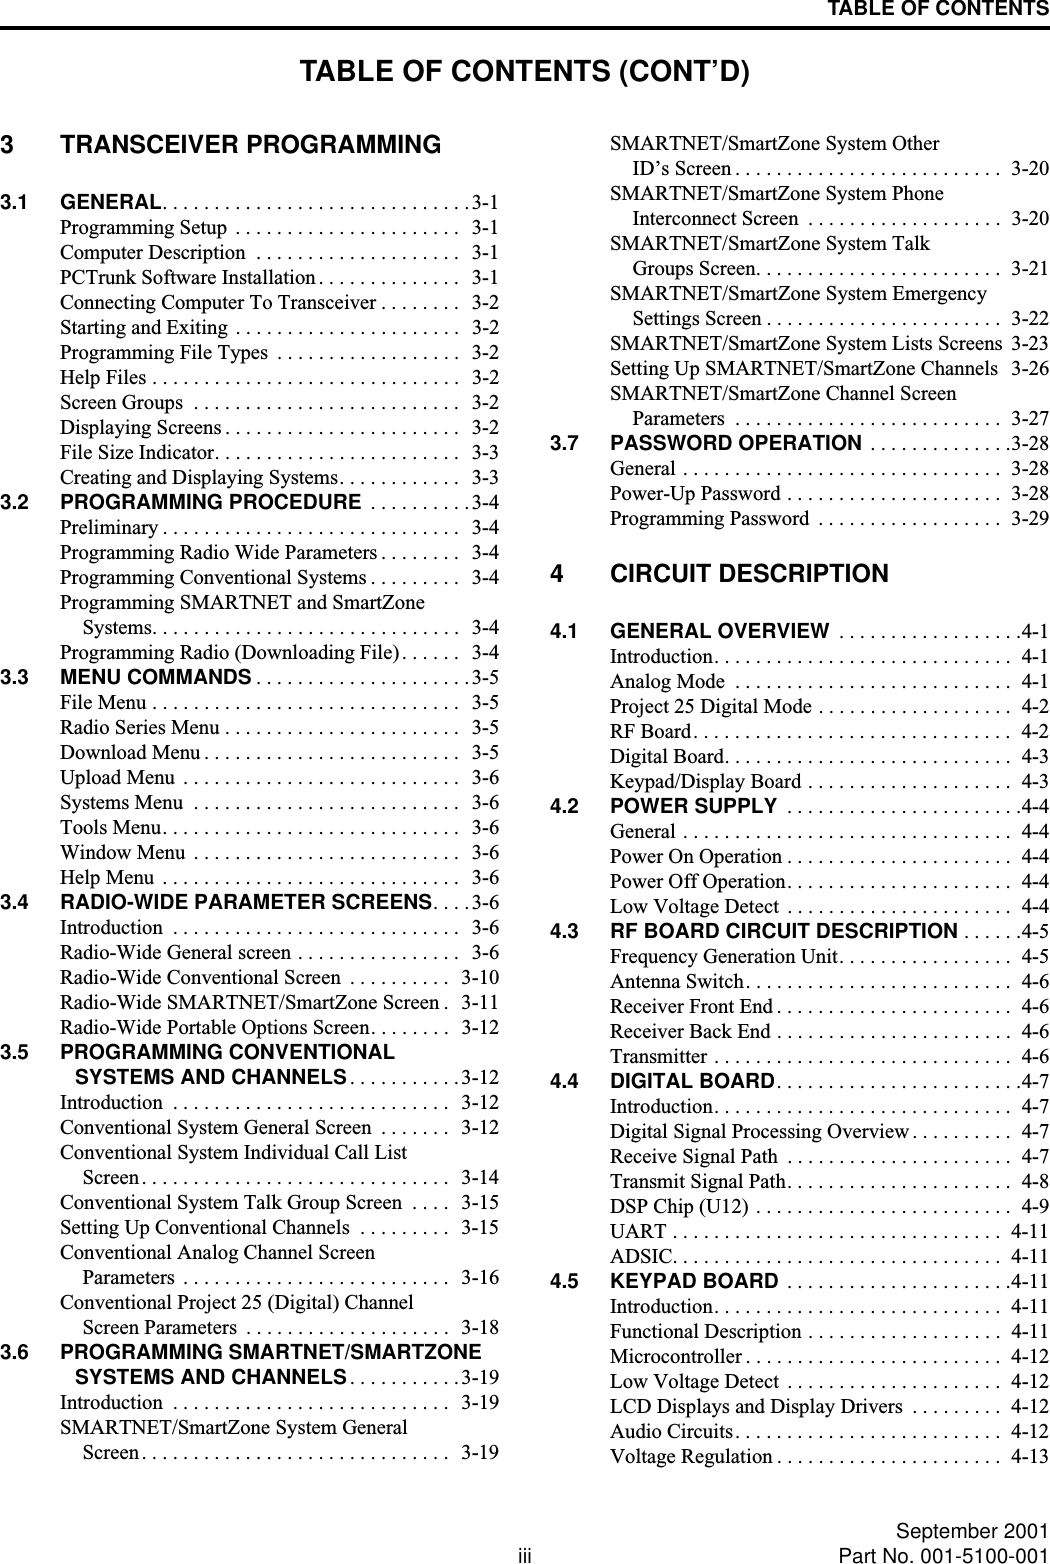 TABLE OF CONTENTS (CONT’D)iii September 2001Part No. 001-5100-001TABLE OF CONTENTS3 TRANSCEIVER PROGRAMMING3.1 GENERAL. . . . . . . . . . . . . . . . . . . . . . . . . . . . . .3-1Programming Setup  . . . . . . . . . . . . . . . . . . . . . .  3-1Computer Description  . . . . . . . . . . . . . . . . . . . .   3-1PCTrunk Software Installation . . . . . . . . . . . . . .  3-1Connecting Computer To Transceiver . . . . . . . .   3-2Starting and Exiting . . . . . . . . . . . . . . . . . . . . . .  3-2Programming File Types  . . . . . . . . . . . . . . . . . .  3-2Help Files . . . . . . . . . . . . . . . . . . . . . . . . . . . . . .  3-2Screen Groups  . . . . . . . . . . . . . . . . . . . . . . . . . .  3-2Displaying Screens . . . . . . . . . . . . . . . . . . . . . . .  3-2File Size Indicator. . . . . . . . . . . . . . . . . . . . . . . .  3-3Creating and Displaying Systems. . . . . . . . . . . .   3-33.2 PROGRAMMING PROCEDURE  . . . . . . . . . .3-4Preliminary . . . . . . . . . . . . . . . . . . . . . . . . . . . . .  3-4Programming Radio Wide Parameters . . . . . . . .  3-4Programming Conventional Systems . . . . . . . . .   3-4Programming SMARTNET and SmartZoneSystems. . . . . . . . . . . . . . . . . . . . . . . . . . . . . .  3-4Programming Radio (Downloading File). . . . . .  3-43.3 MENU COMMANDS . . . . . . . . . . . . . . . . . . . . .3-5File Menu . . . . . . . . . . . . . . . . . . . . . . . . . . . . . .  3-5Radio Series Menu . . . . . . . . . . . . . . . . . . . . . . .  3-5Download Menu . . . . . . . . . . . . . . . . . . . . . . . . .  3-5Upload Menu  . . . . . . . . . . . . . . . . . . . . . . . . . . .  3-6Systems Menu  . . . . . . . . . . . . . . . . . . . . . . . . . .  3-6Tools Menu. . . . . . . . . . . . . . . . . . . . . . . . . . . . .  3-6Window Menu  . . . . . . . . . . . . . . . . . . . . . . . . . .  3-6Help Menu  . . . . . . . . . . . . . . . . . . . . . . . . . . . . .  3-63.4 RADIO-WIDE PARAMETER SCREENS. . . . 3-6Introduction  . . . . . . . . . . . . . . . . . . . . . . . . . . . .  3-6Radio-Wide General screen . . . . . . . . . . . . . . . .  3-6Radio-Wide Conventional Screen  . . . . . . . . . .   3-10Radio-Wide SMARTNET/SmartZone Screen .   3-11Radio-Wide Portable Options Screen. . . . . . . .  3-123.5 PROGRAMMING CONVENTIONALSYSTEMS AND CHANNELS. . . . . . . . . . .3-12Introduction  . . . . . . . . . . . . . . . . . . . . . . . . . . .  3-12Conventional System General Screen  . . . . . . .   3-12Conventional System Individual Call ListScreen. . . . . . . . . . . . . . . . . . . . . . . . . . . . . .  3-14Conventional System Talk Group Screen  . . . .   3-15Setting Up Conventional Channels  . . . . . . . . .  3-15Conventional Analog Channel ScreenParameters  . . . . . . . . . . . . . . . . . . . . . . . . . .  3-16Conventional Project 25 (Digital) ChannelScreen Parameters  . . . . . . . . . . . . . . . . . . . .  3-183.6 PROGRAMMING SMARTNET/SMARTZONESYSTEMS AND CHANNELS. . . . . . . . . . .3-19Introduction  . . . . . . . . . . . . . . . . . . . . . . . . . . .  3-19SMARTNET/SmartZone System GeneralScreen. . . . . . . . . . . . . . . . . . . . . . . . . . . . . .  3-19SMARTNET/SmartZone System OtherID’s Screen . . . . . . . . . . . . . . . . . . . . . . . . . .  3-20SMARTNET/SmartZone System PhoneInterconnect Screen  . . . . . . . . . . . . . . . . . . .  3-20SMARTNET/SmartZone System TalkGroups Screen. . . . . . . . . . . . . . . . . . . . . . . .  3-21SMARTNET/SmartZone System EmergencySettings Screen . . . . . . . . . . . . . . . . . . . . . . .  3-22SMARTNET/SmartZone System Lists Screens  3-23Setting Up SMARTNET/SmartZone Channels  3-26SMARTNET/SmartZone Channel ScreenParameters  . . . . . . . . . . . . . . . . . . . . . . . . . .  3-273.7 PASSWORD OPERATION . . . . . . . . . . . . . .3-28General . . . . . . . . . . . . . . . . . . . . . . . . . . . . . . .  3-28Power-Up Password . . . . . . . . . . . . . . . . . . . . .  3-28Programming Password  . . . . . . . . . . . . . . . . . .  3-294 CIRCUIT DESCRIPTION4.1 GENERAL OVERVIEW  . . . . . . . . . . . . . . . . . .4-1Introduction. . . . . . . . . . . . . . . . . . . . . . . . . . . . .  4-1Analog Mode  . . . . . . . . . . . . . . . . . . . . . . . . . . .  4-1Project 25 Digital Mode . . . . . . . . . . . . . . . . . . .  4-2RF Board. . . . . . . . . . . . . . . . . . . . . . . . . . . . . . .  4-2Digital Board. . . . . . . . . . . . . . . . . . . . . . . . . . . .  4-3Keypad/Display Board . . . . . . . . . . . . . . . . . . . .  4-34.2 POWER SUPPLY  . . . . . . . . . . . . . . . . . . . . . . .4-4General . . . . . . . . . . . . . . . . . . . . . . . . . . . . . . . .  4-4Power On Operation . . . . . . . . . . . . . . . . . . . . . .  4-4Power Off Operation. . . . . . . . . . . . . . . . . . . . . .  4-4Low Voltage Detect  . . . . . . . . . . . . . . . . . . . . . .  4-44.3 RF BOARD CIRCUIT DESCRIPTION . . . . . .4-5Frequency Generation Unit. . . . . . . . . . . . . . . . .  4-5Antenna Switch. . . . . . . . . . . . . . . . . . . . . . . . . .  4-6Receiver Front End . . . . . . . . . . . . . . . . . . . . . . .  4-6Receiver Back End . . . . . . . . . . . . . . . . . . . . . . .  4-6Transmitter . . . . . . . . . . . . . . . . . . . . . . . . . . . . .  4-64.4 DIGITAL BOARD. . . . . . . . . . . . . . . . . . . . . . . .4-7Introduction. . . . . . . . . . . . . . . . . . . . . . . . . . . . .  4-7Digital Signal Processing Overview . . . . . . . . . .  4-7Receive Signal Path  . . . . . . . . . . . . . . . . . . . . . .  4-7Transmit Signal Path. . . . . . . . . . . . . . . . . . . . . .  4-8DSP Chip (U12) . . . . . . . . . . . . . . . . . . . . . . . . .  4-9UART . . . . . . . . . . . . . . . . . . . . . . . . . . . . . . . .  4-11ADSIC. . . . . . . . . . . . . . . . . . . . . . . . . . . . . . . .  4-114.5 KEYPAD BOARD . . . . . . . . . . . . . . . . . . . . . .4-11Introduction. . . . . . . . . . . . . . . . . . . . . . . . . . . .  4-11Functional Description . . . . . . . . . . . . . . . . . . .  4-11Microcontroller . . . . . . . . . . . . . . . . . . . . . . . . .  4-12Low Voltage Detect  . . . . . . . . . . . . . . . . . . . . .  4-12LCD Displays and Display Drivers  . . . . . . . . .  4-12Audio Circuits. . . . . . . . . . . . . . . . . . . . . . . . . .  4-12Voltage Regulation . . . . . . . . . . . . . . . . . . . . . .  4-13